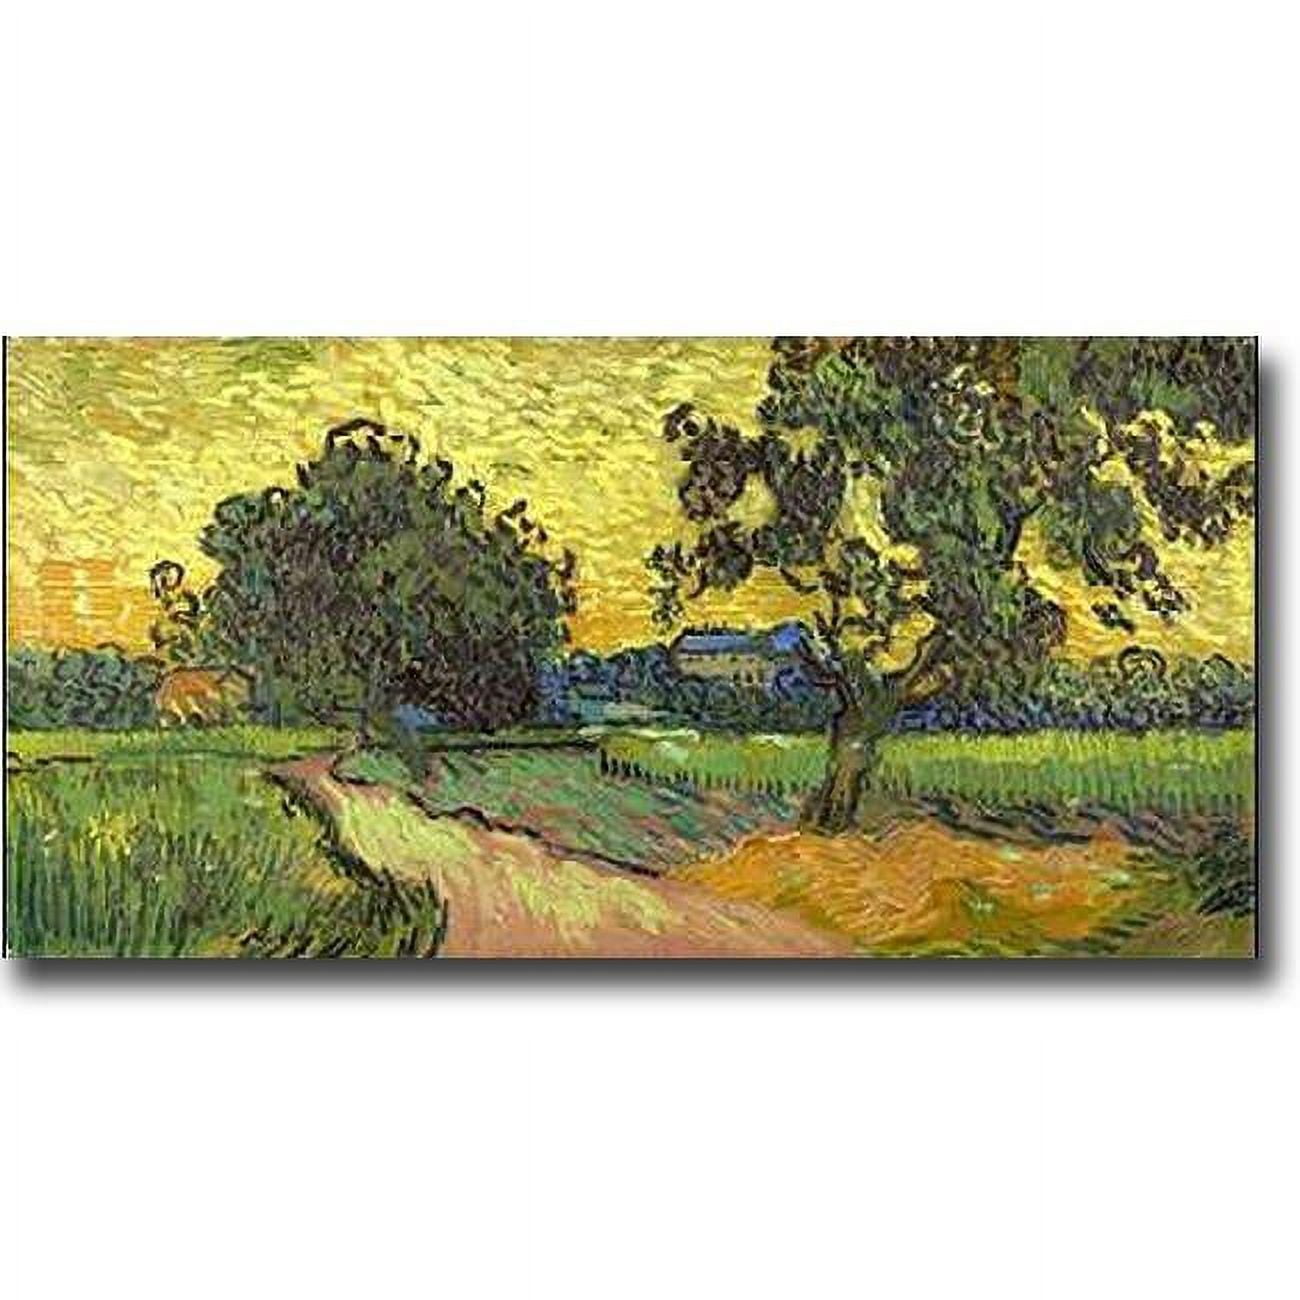 1224f709sag Landscape At Twilight By Vincent Van Gogh Premium Gallery-wrapped Canvas Giclee Art - Ready To Hang, 12 X 24 X 1.5 In.